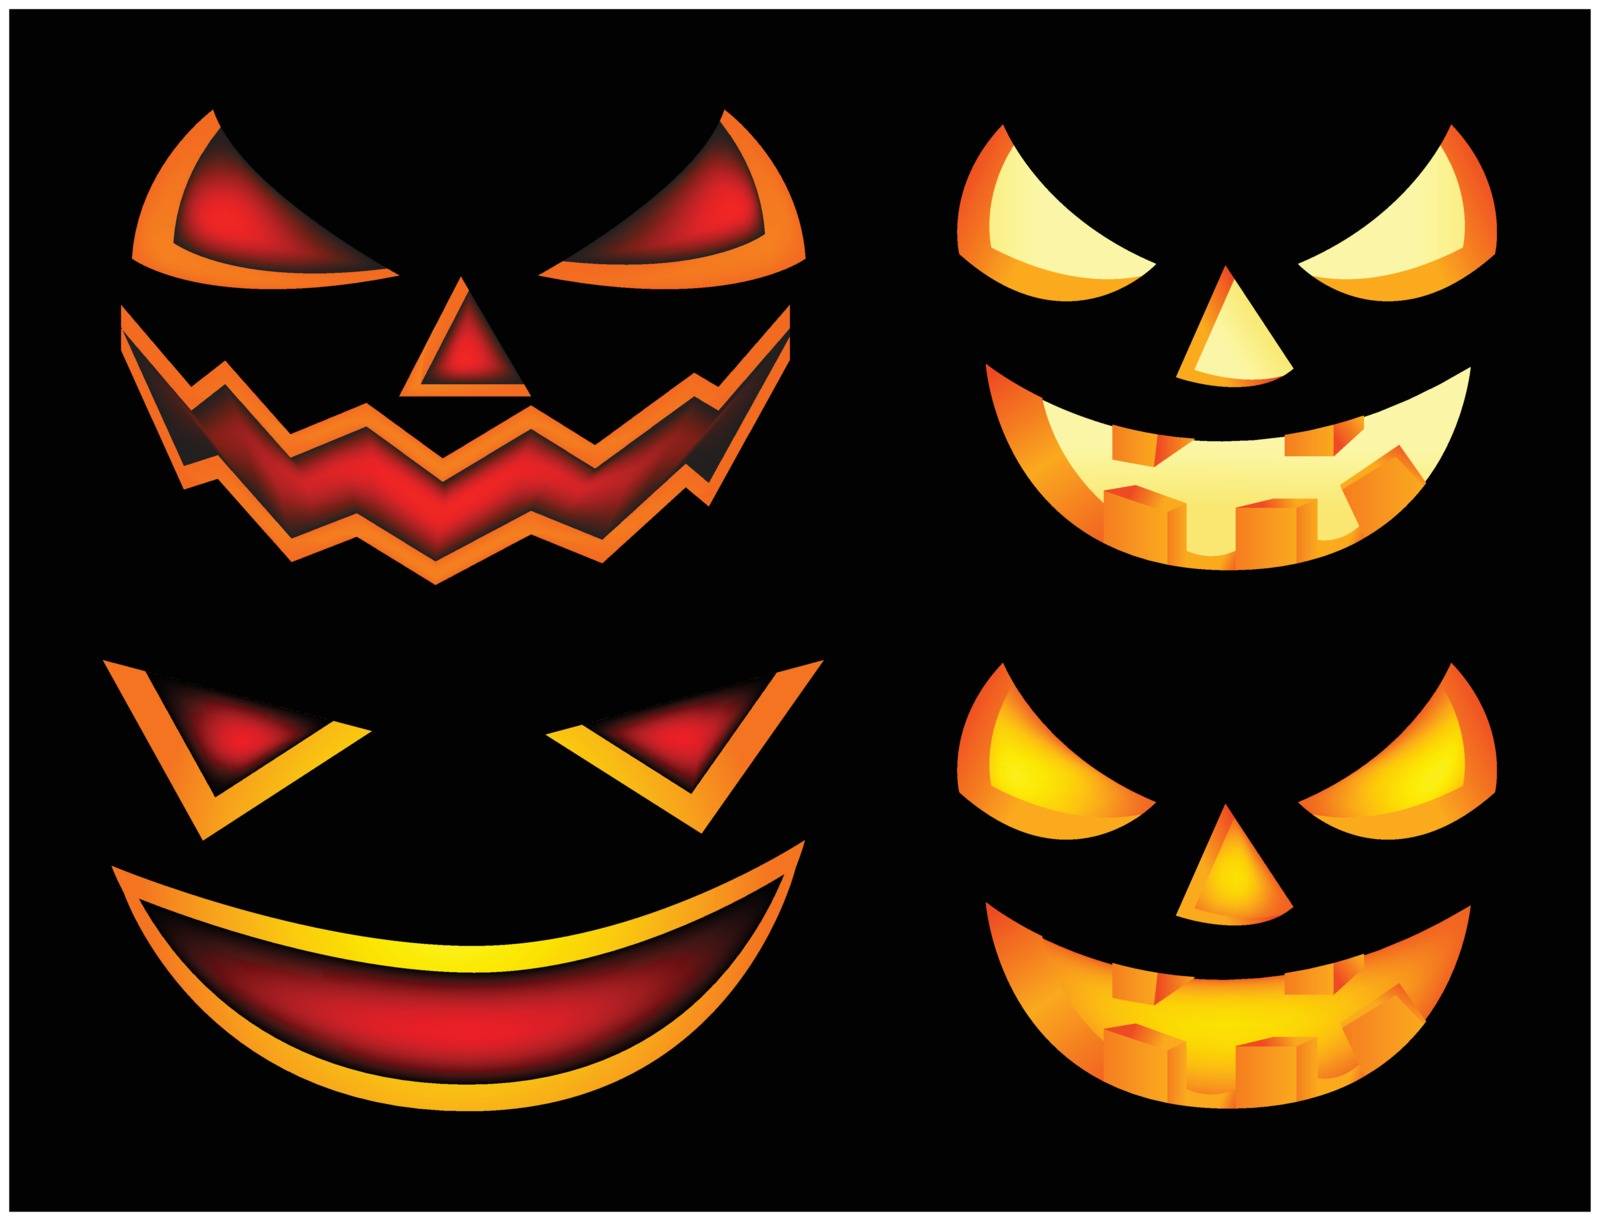 Halloween scary pumpkin face vector illustration set, Jack O Lantern smile isolated on black background. Scary orange picture with eyes in the dark.